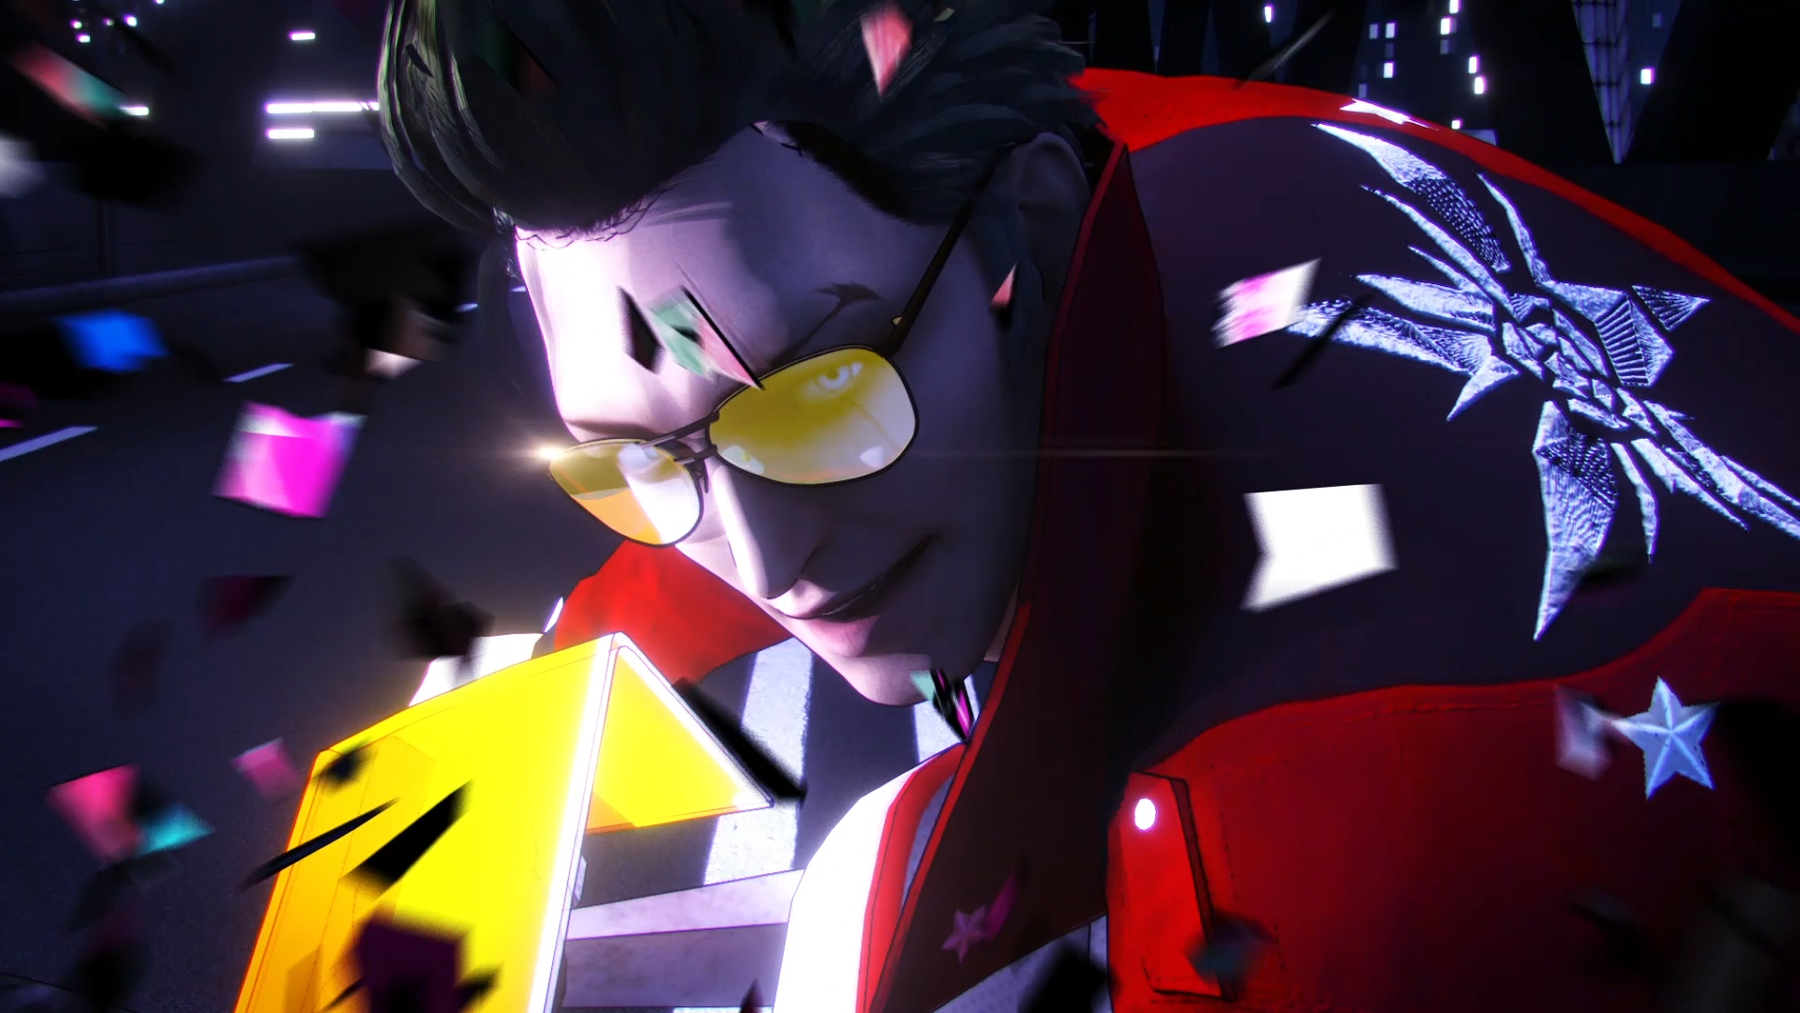 Switch Exclusive No More Heroes 3 Has Been Delayed To 2021 Wilson S Media - mah game swim hangout roblox amino